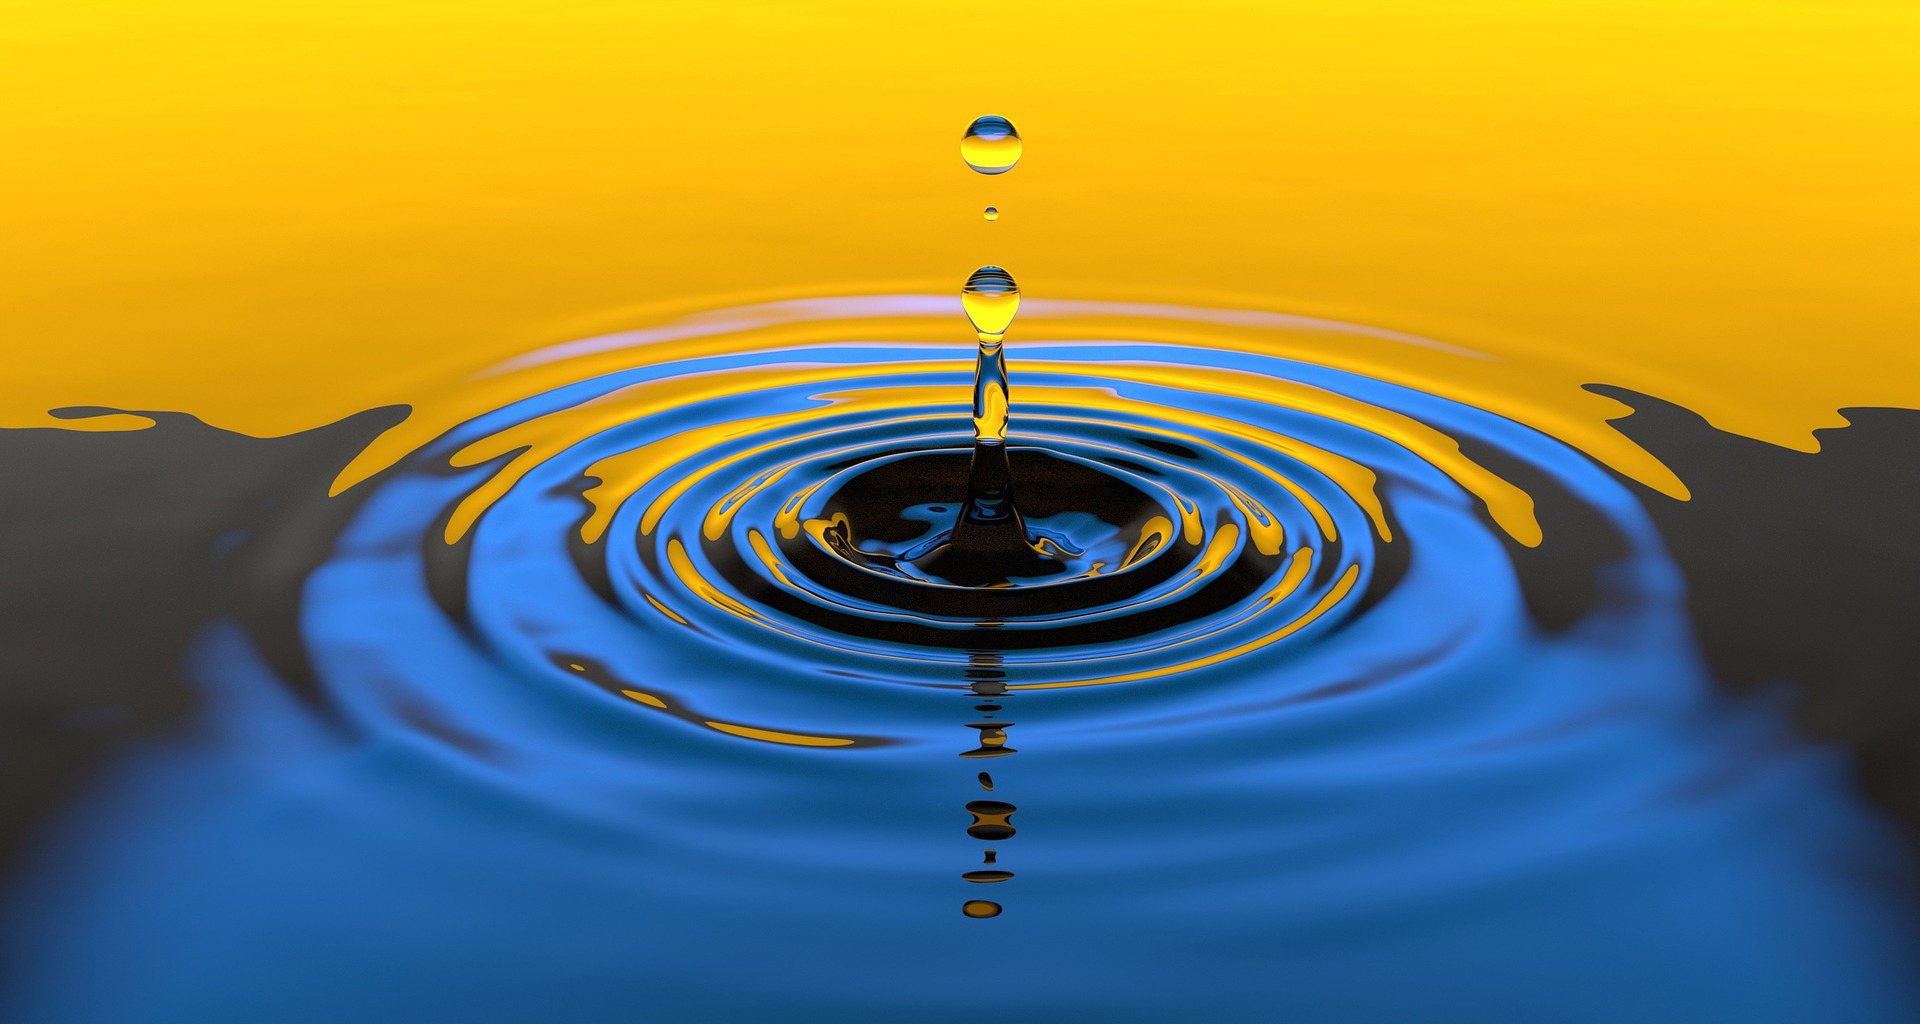 Droplet and Ripple Effect